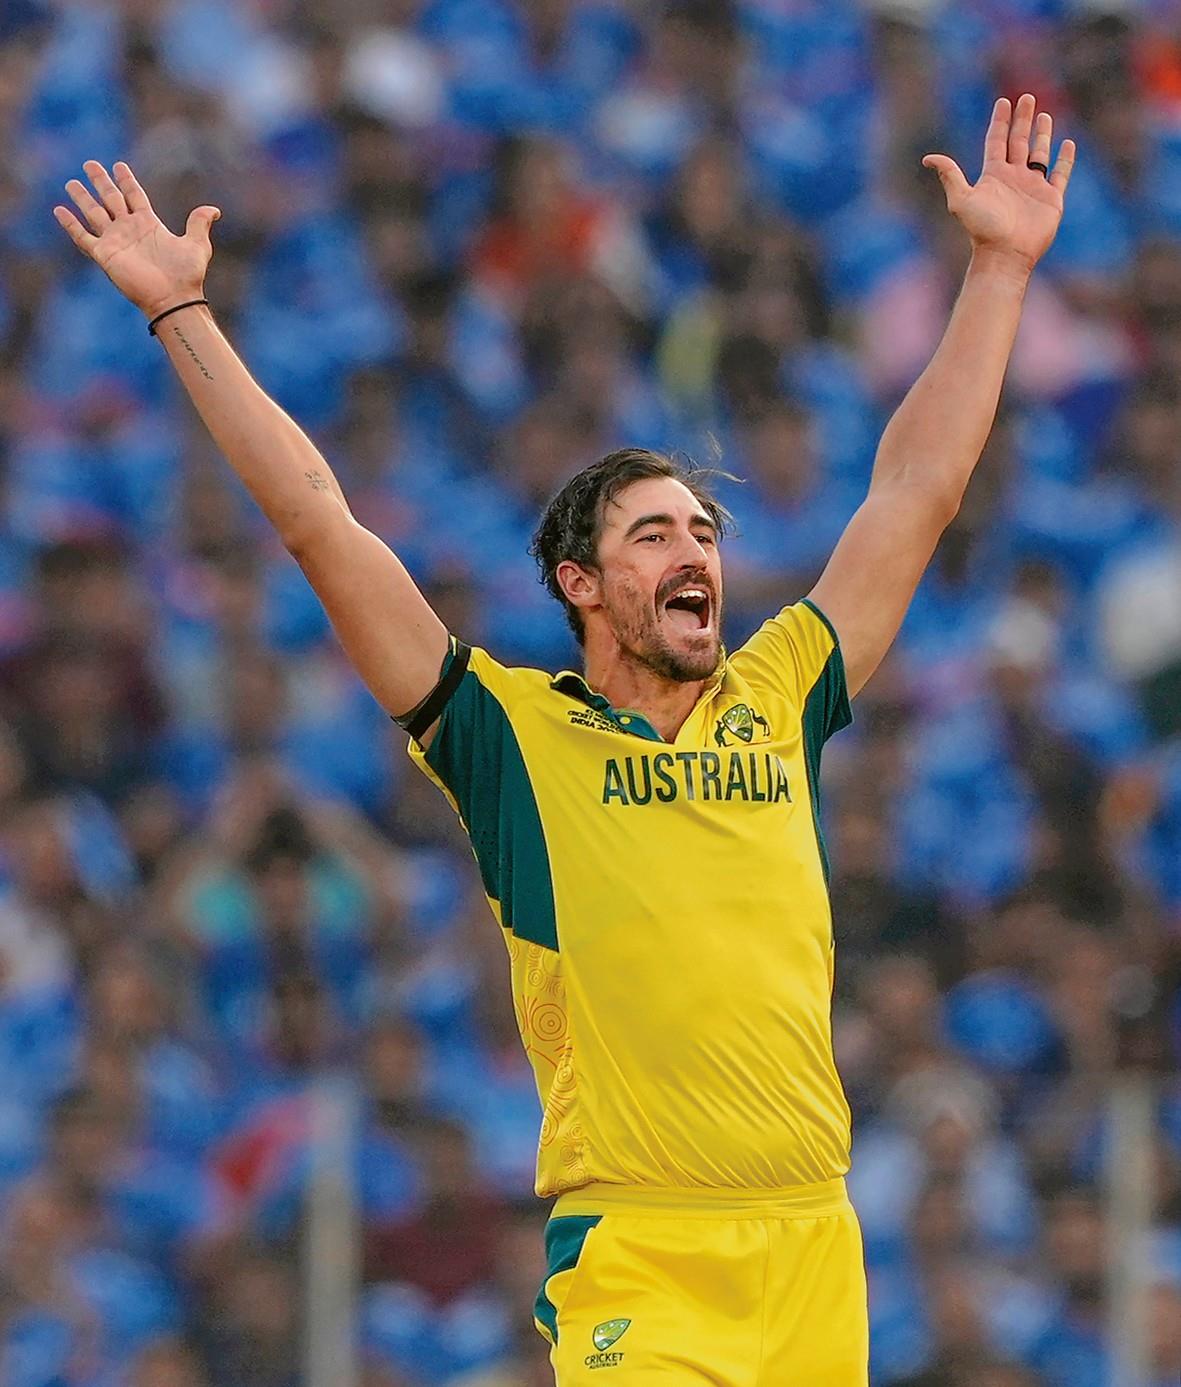 STARC CONTRAST: IPL AUCTION Pacer eclipses Pat Cummins to become the most expensive player